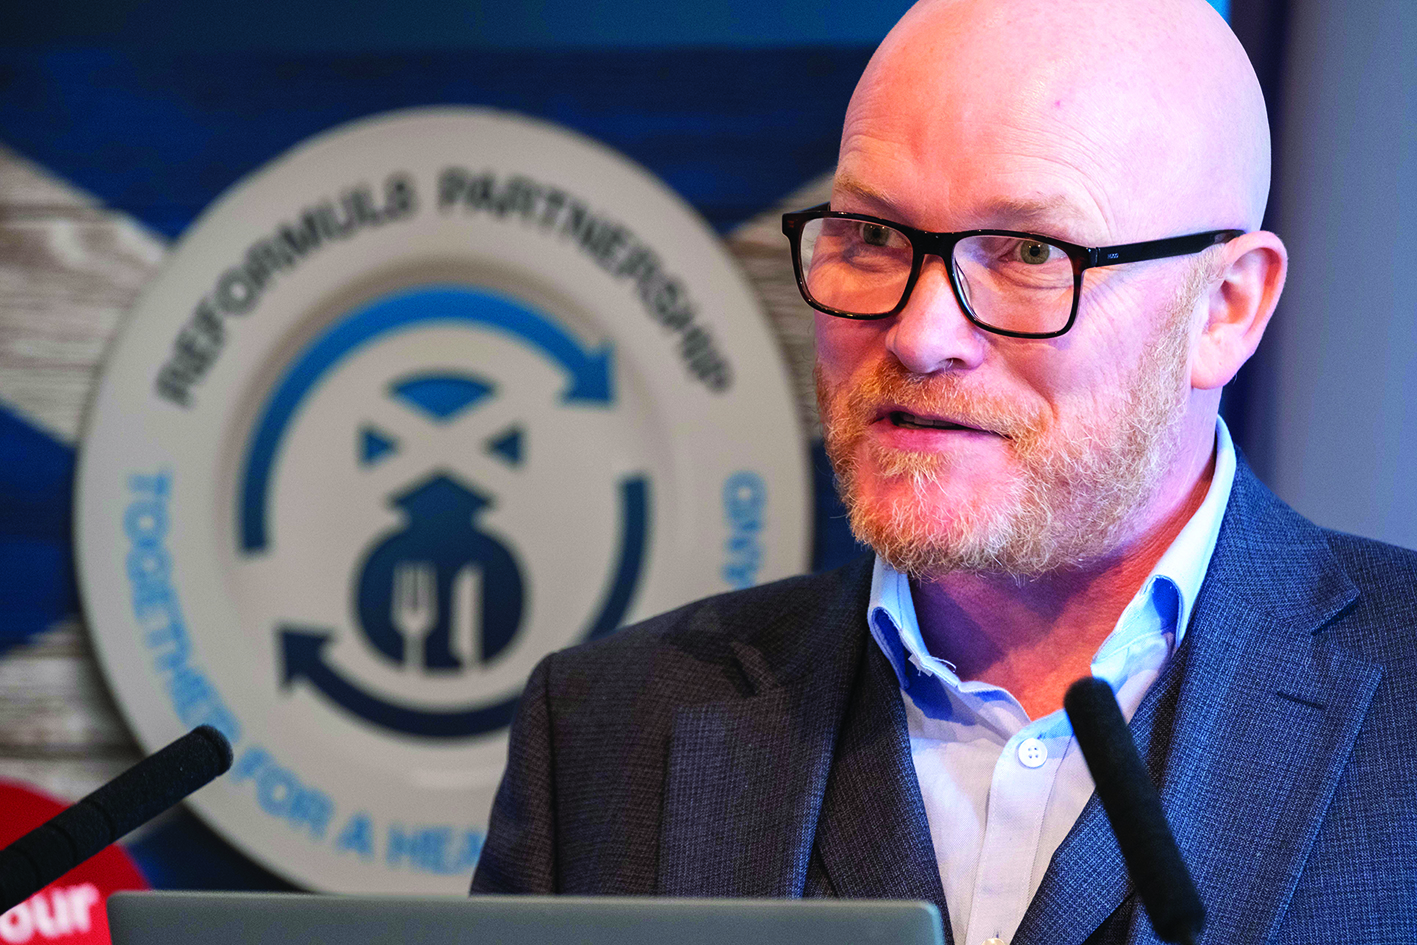 Scotland's national chef Gary Maclean has revealed which firms are receiving the latest round of Reformul8 funding.